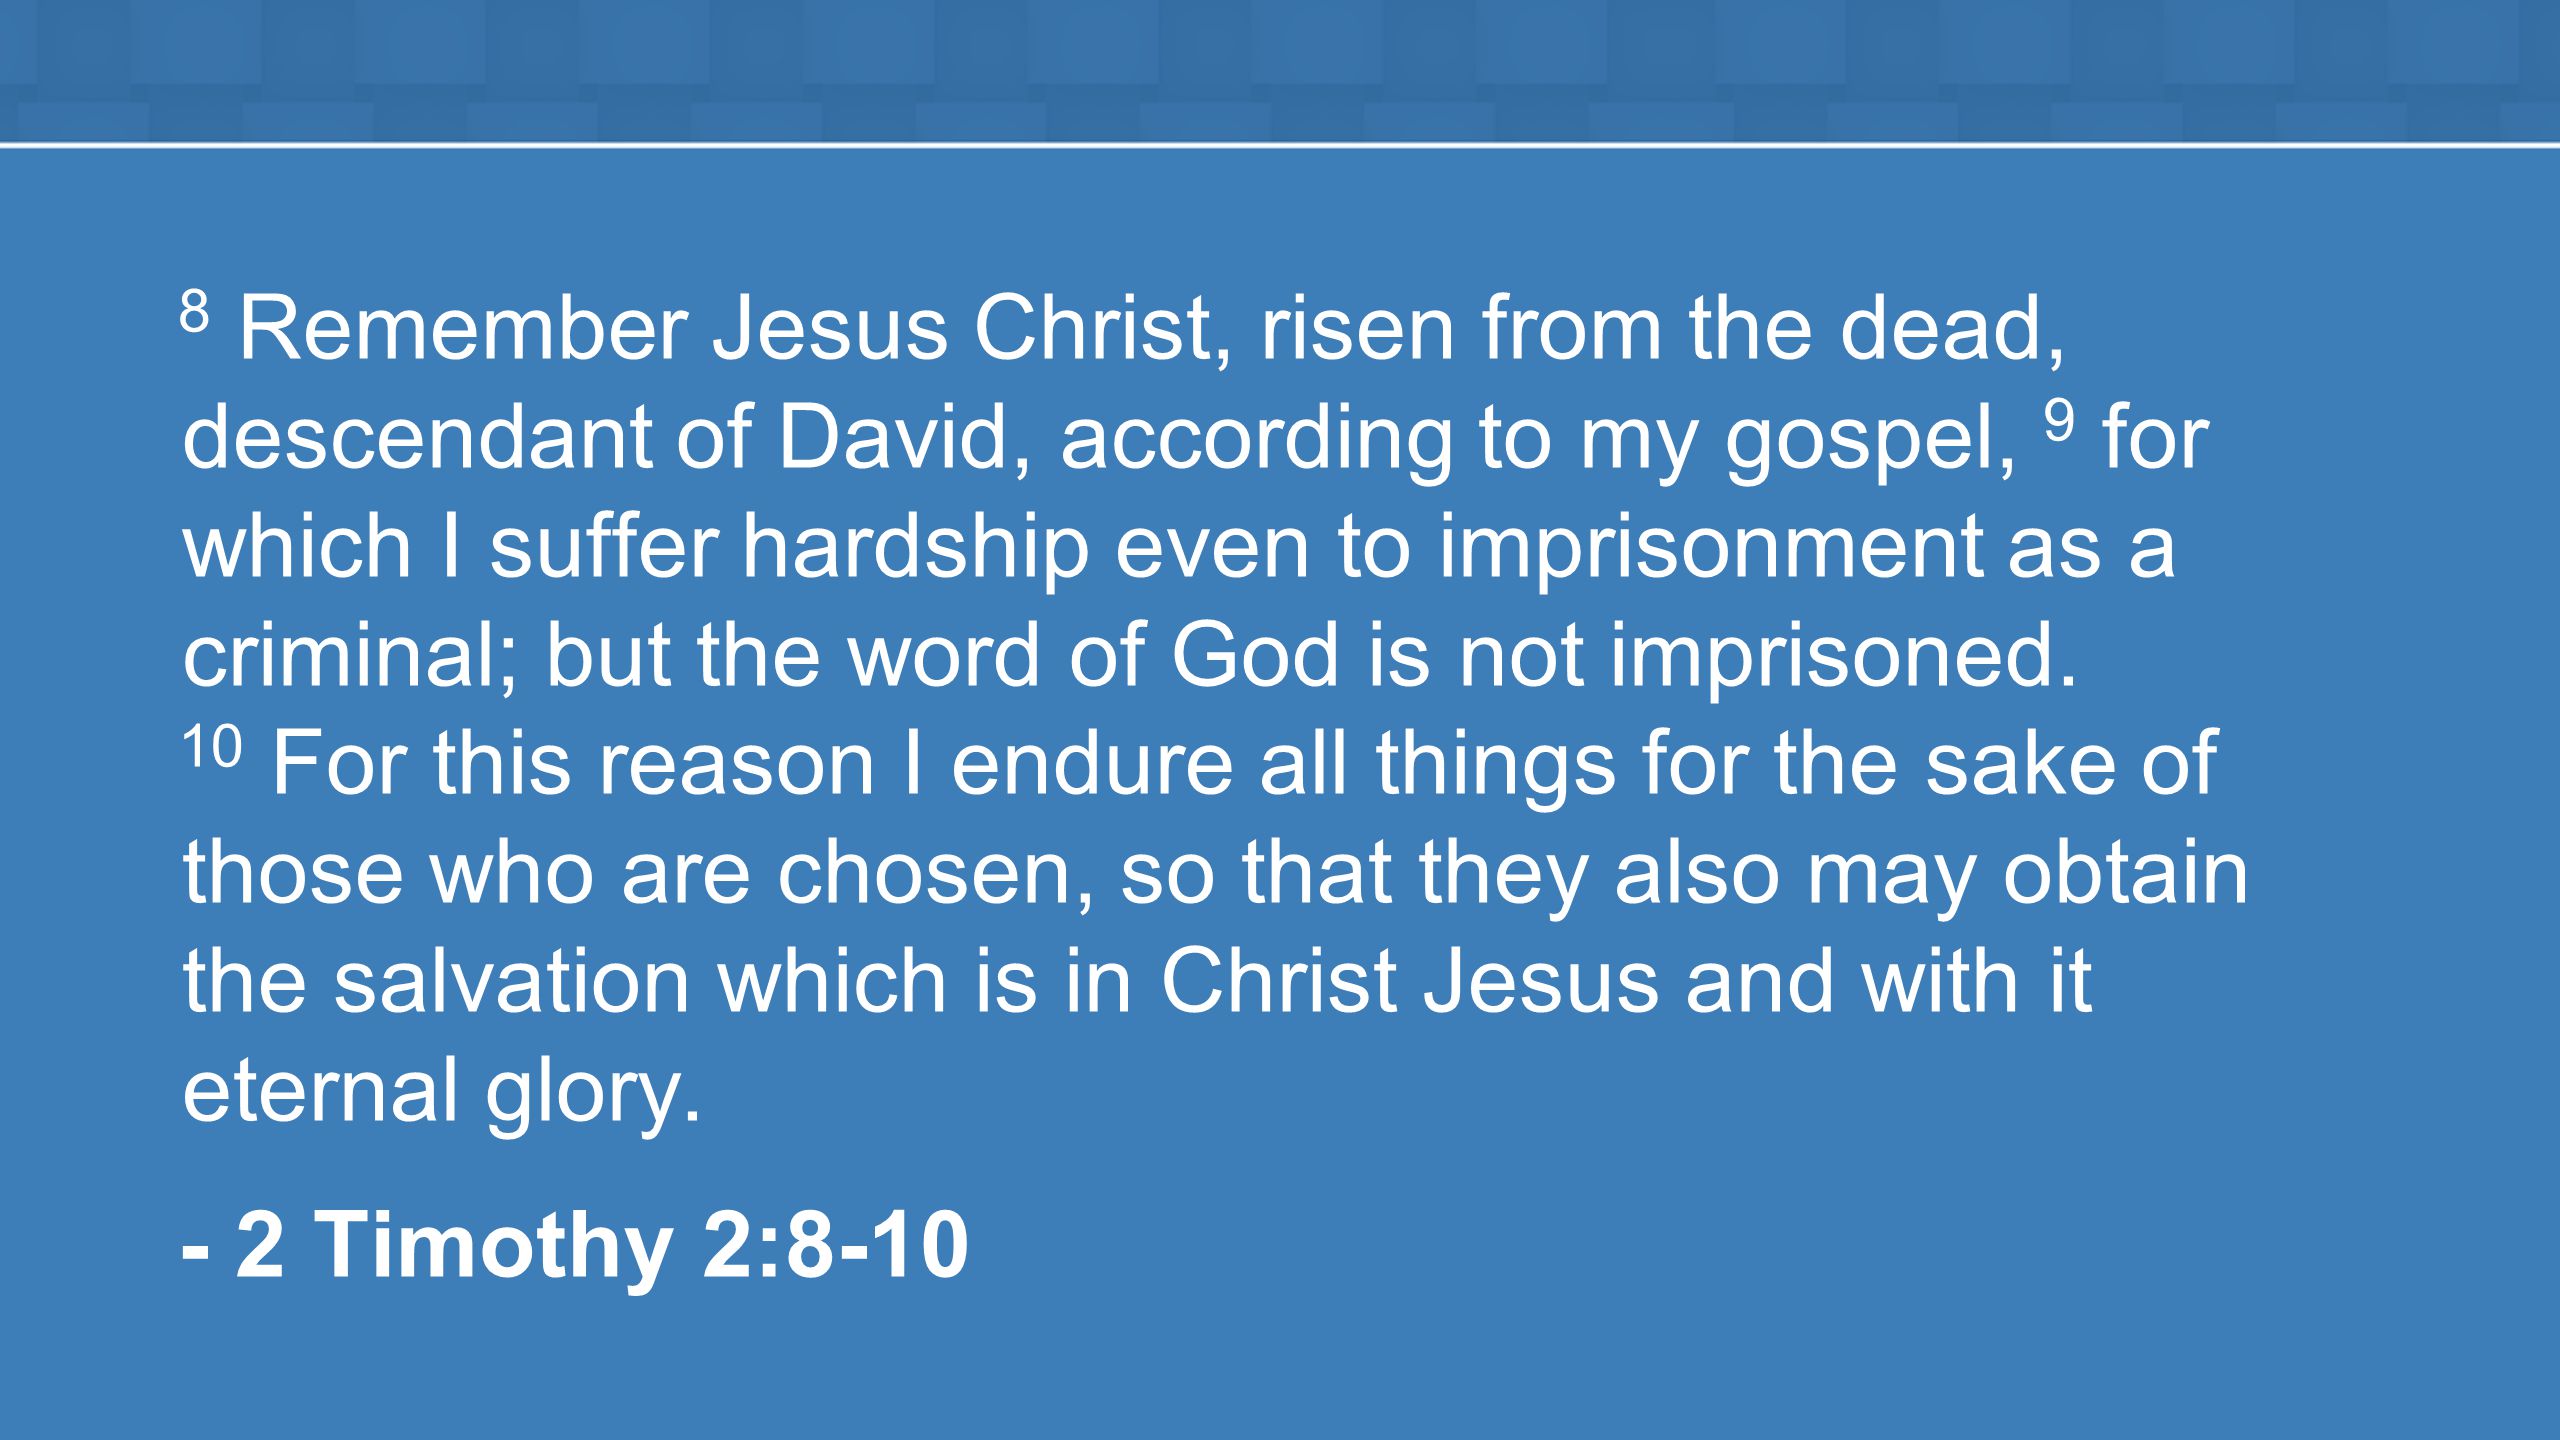 8 Remember Jesus Christ, risen from the dead, descendant of David, according to my gospel, 9 for which I suffer hardship even to imprisonment as a criminal; but the word of God is not imprisoned.